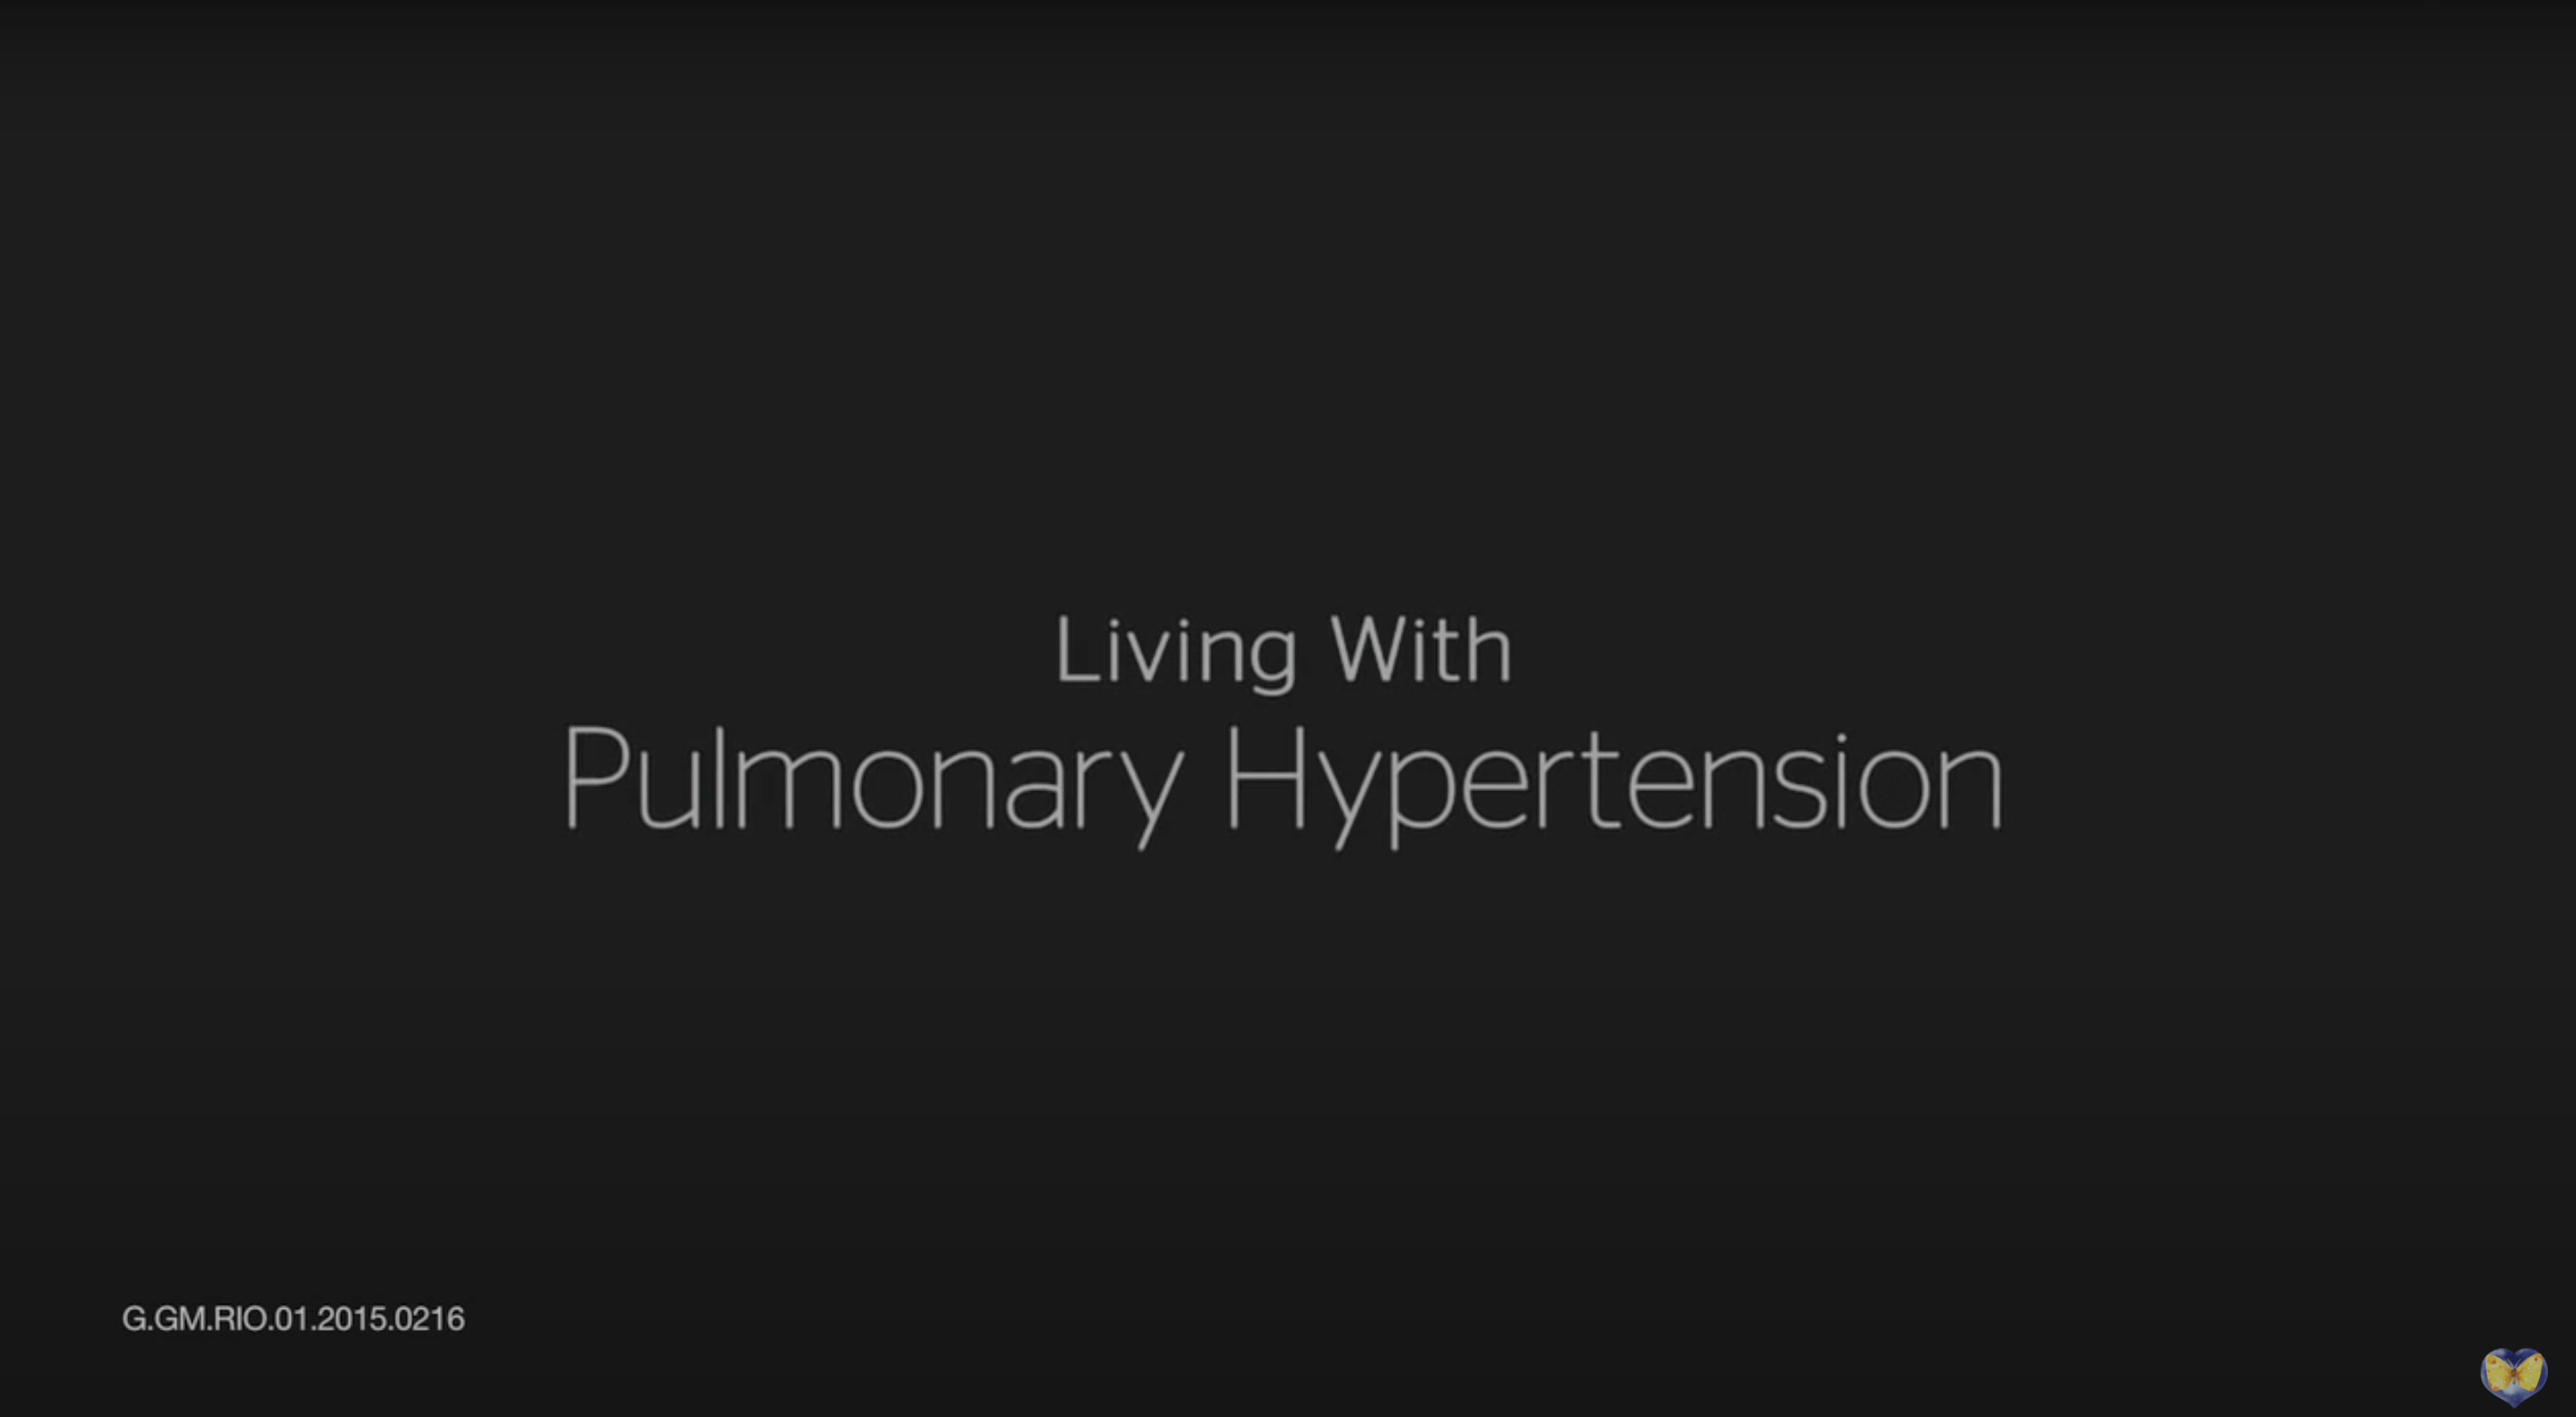 Educational Video: Living With Pulmonary Hypertension